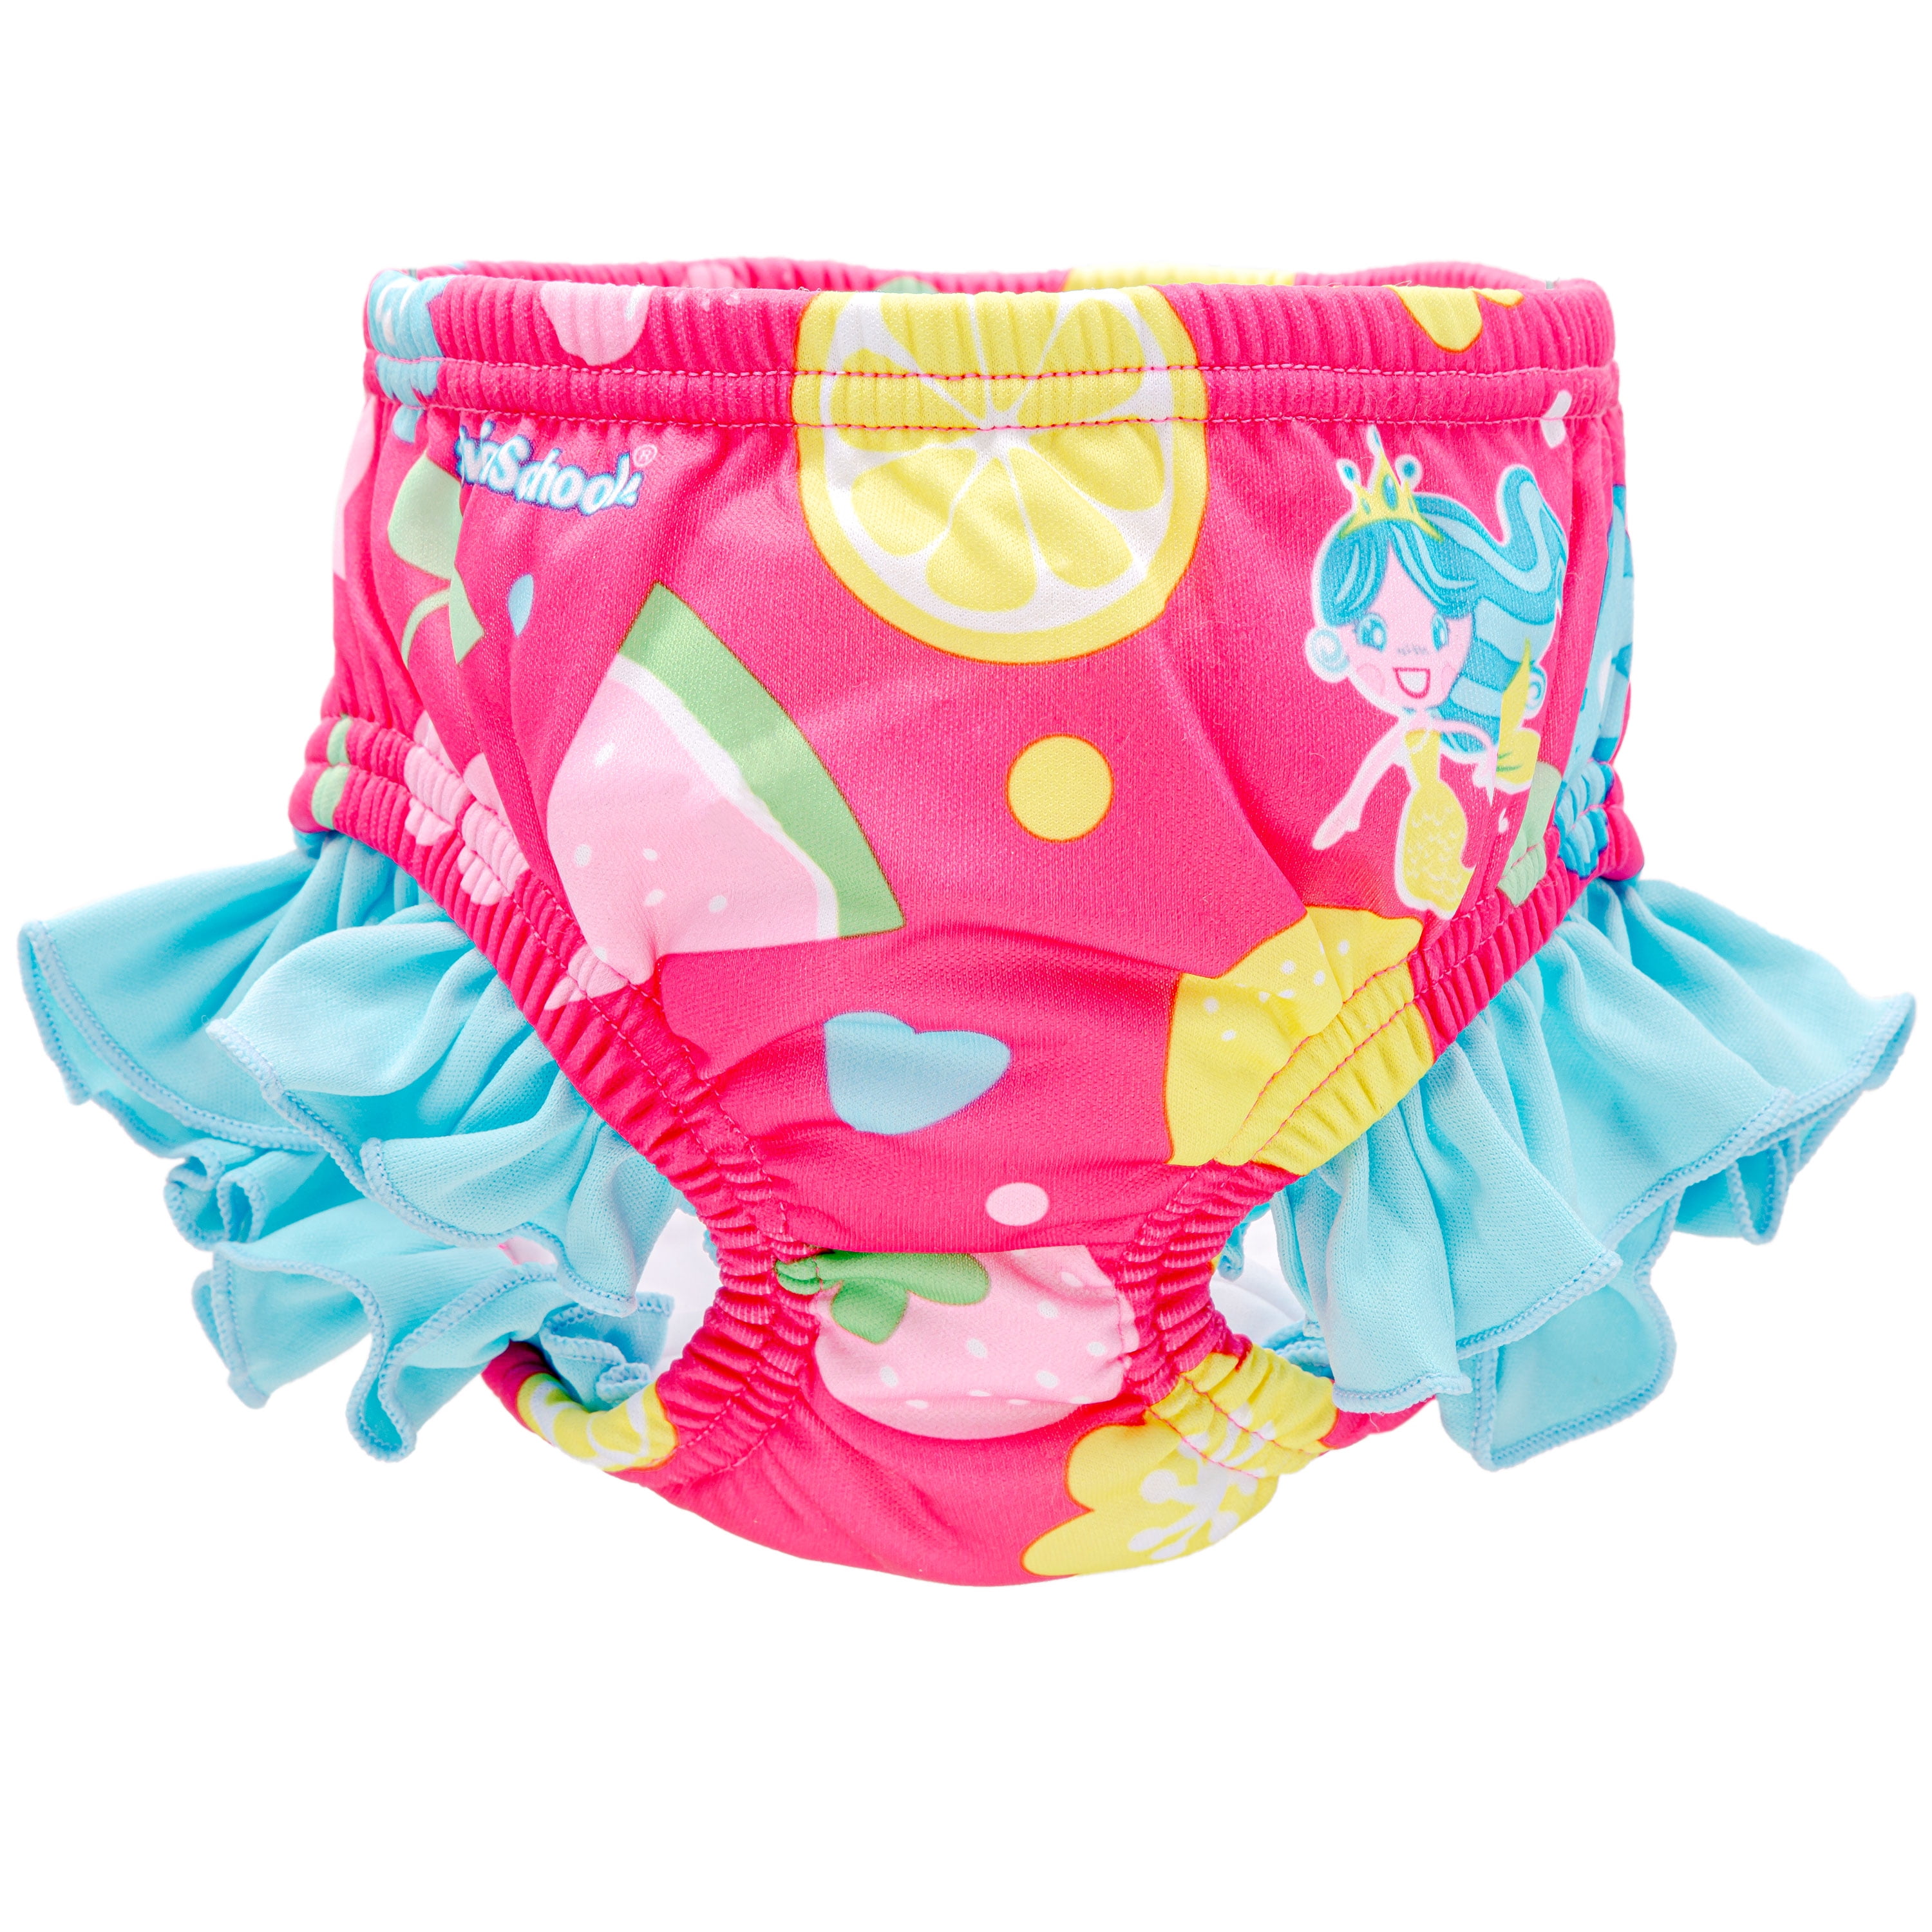 Swim School Reusable Polyester Swim Diaper Pink Mermaid, Ages 12 Months and  up (18-22 lbs.) 